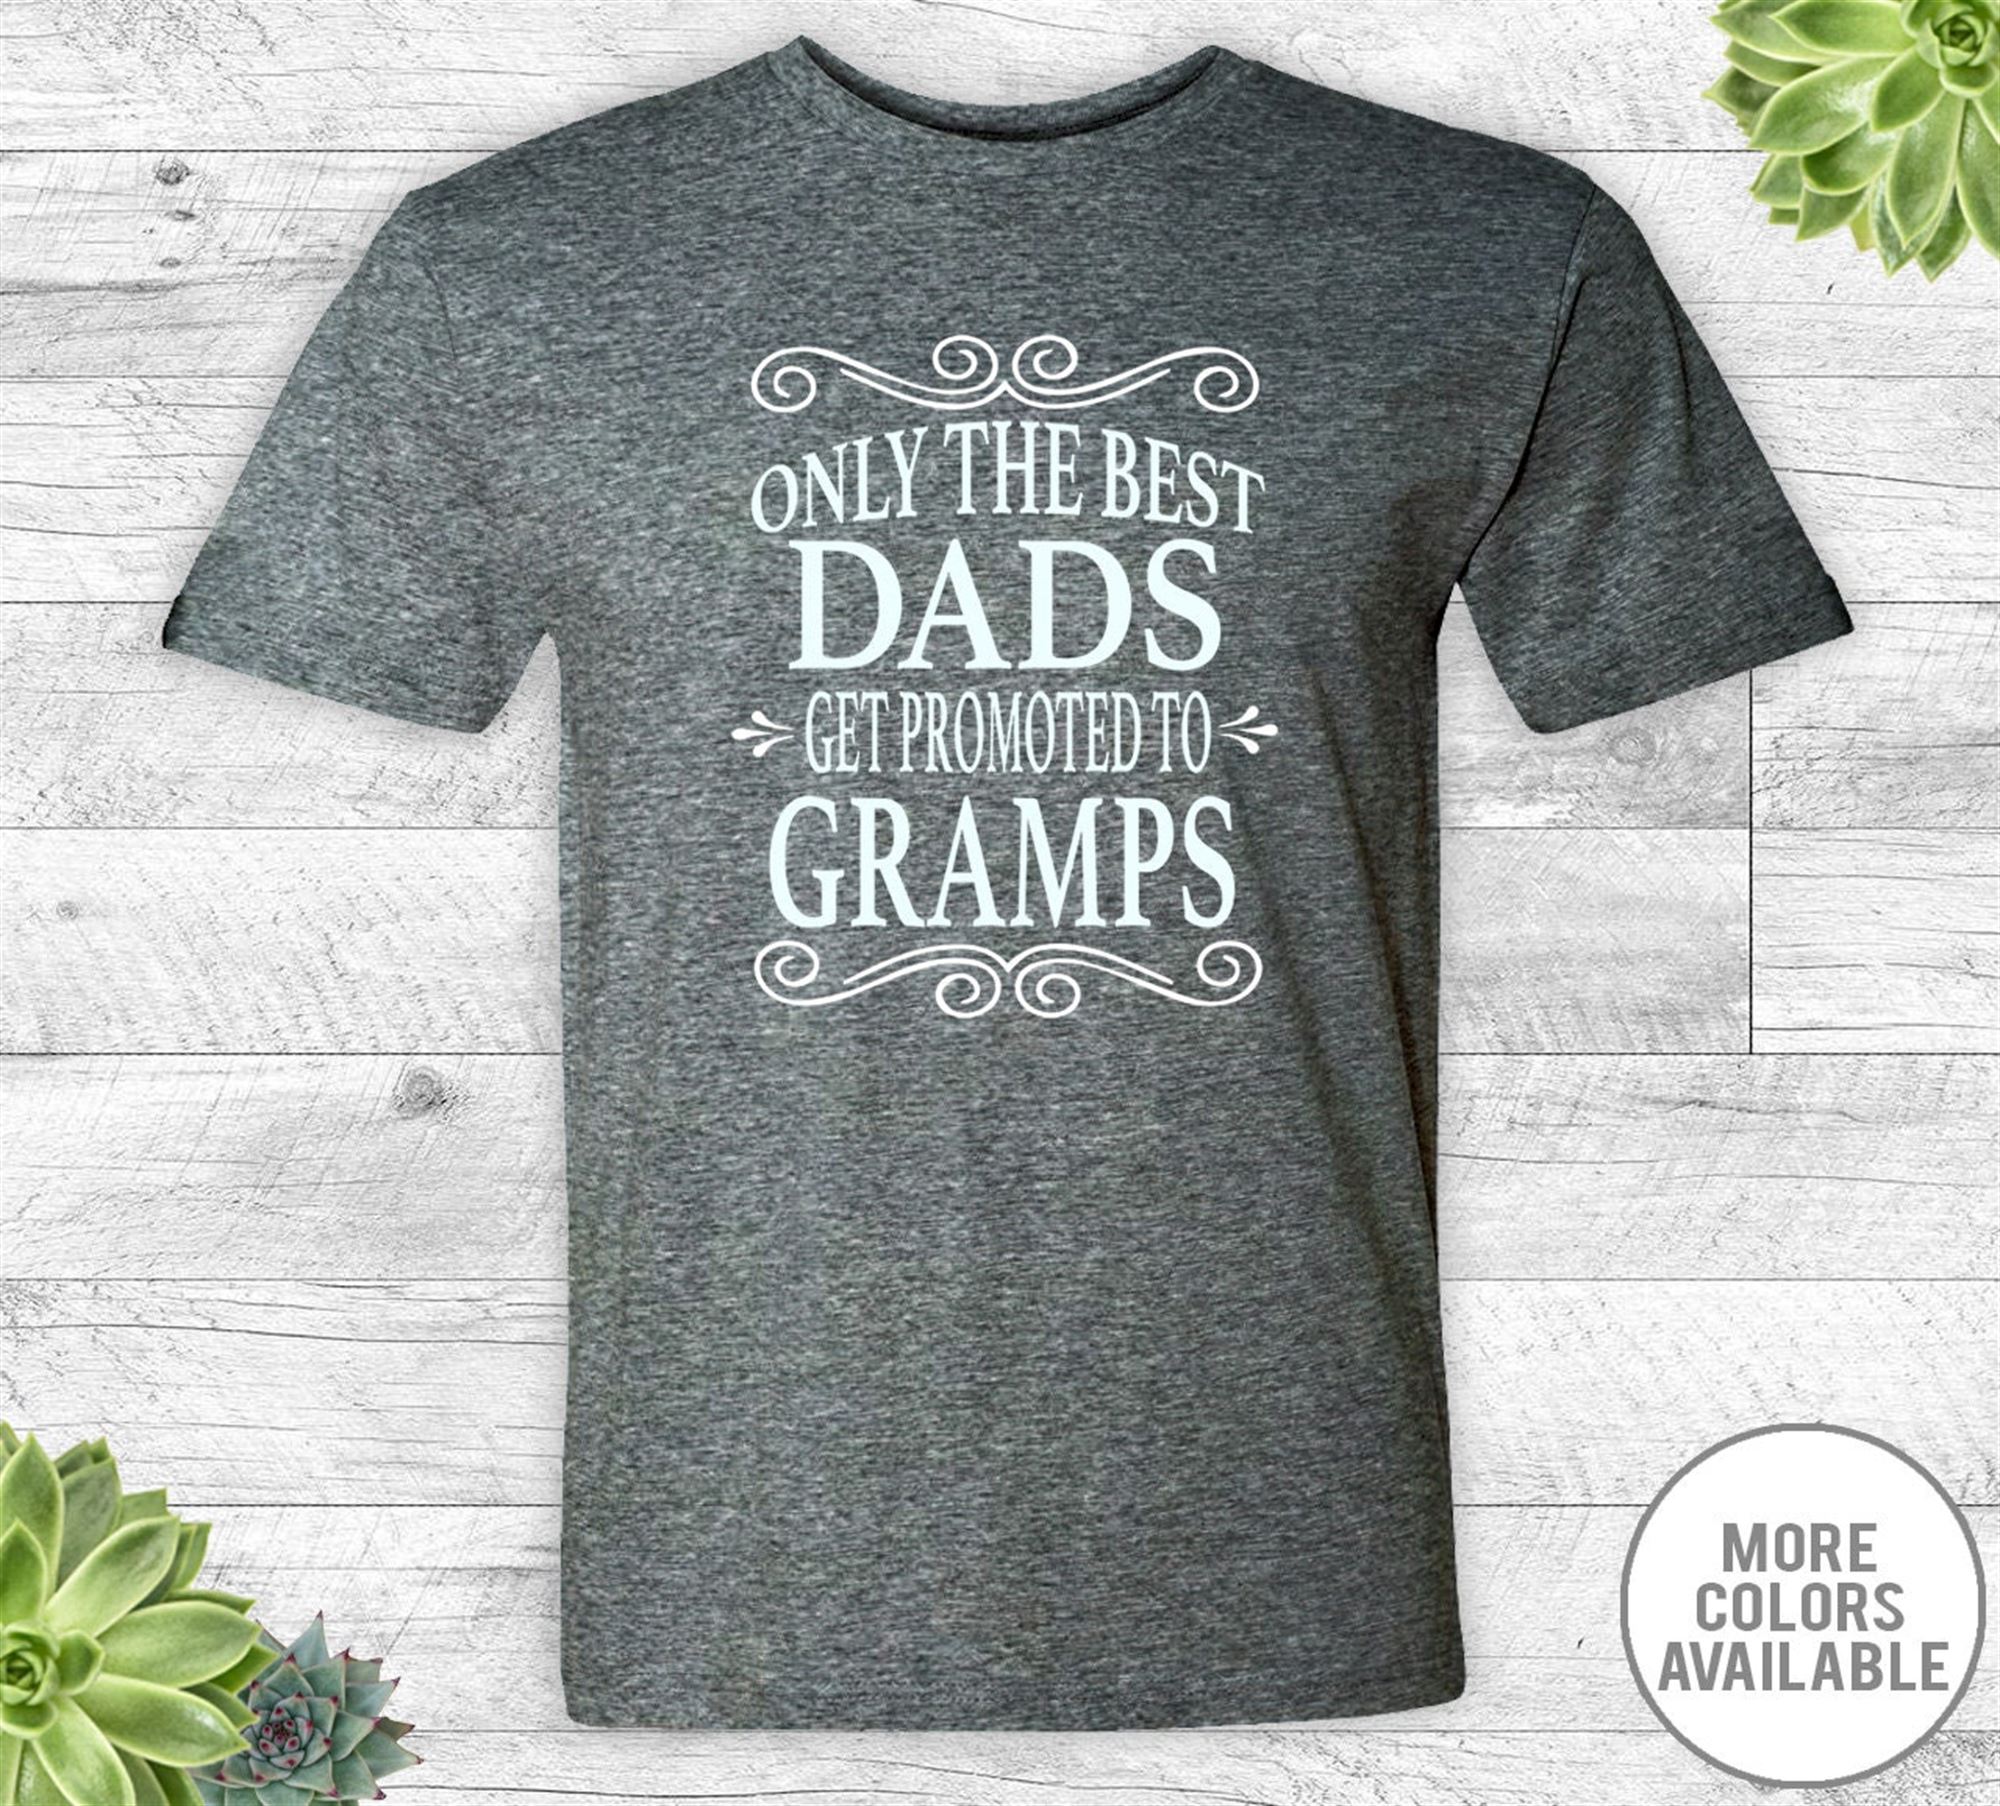 Amazing Only The Best Dads Get Promoted To Gramps Unisex Shirt - Gramps Shirt - Gramps Gift - Father's Day Gift 